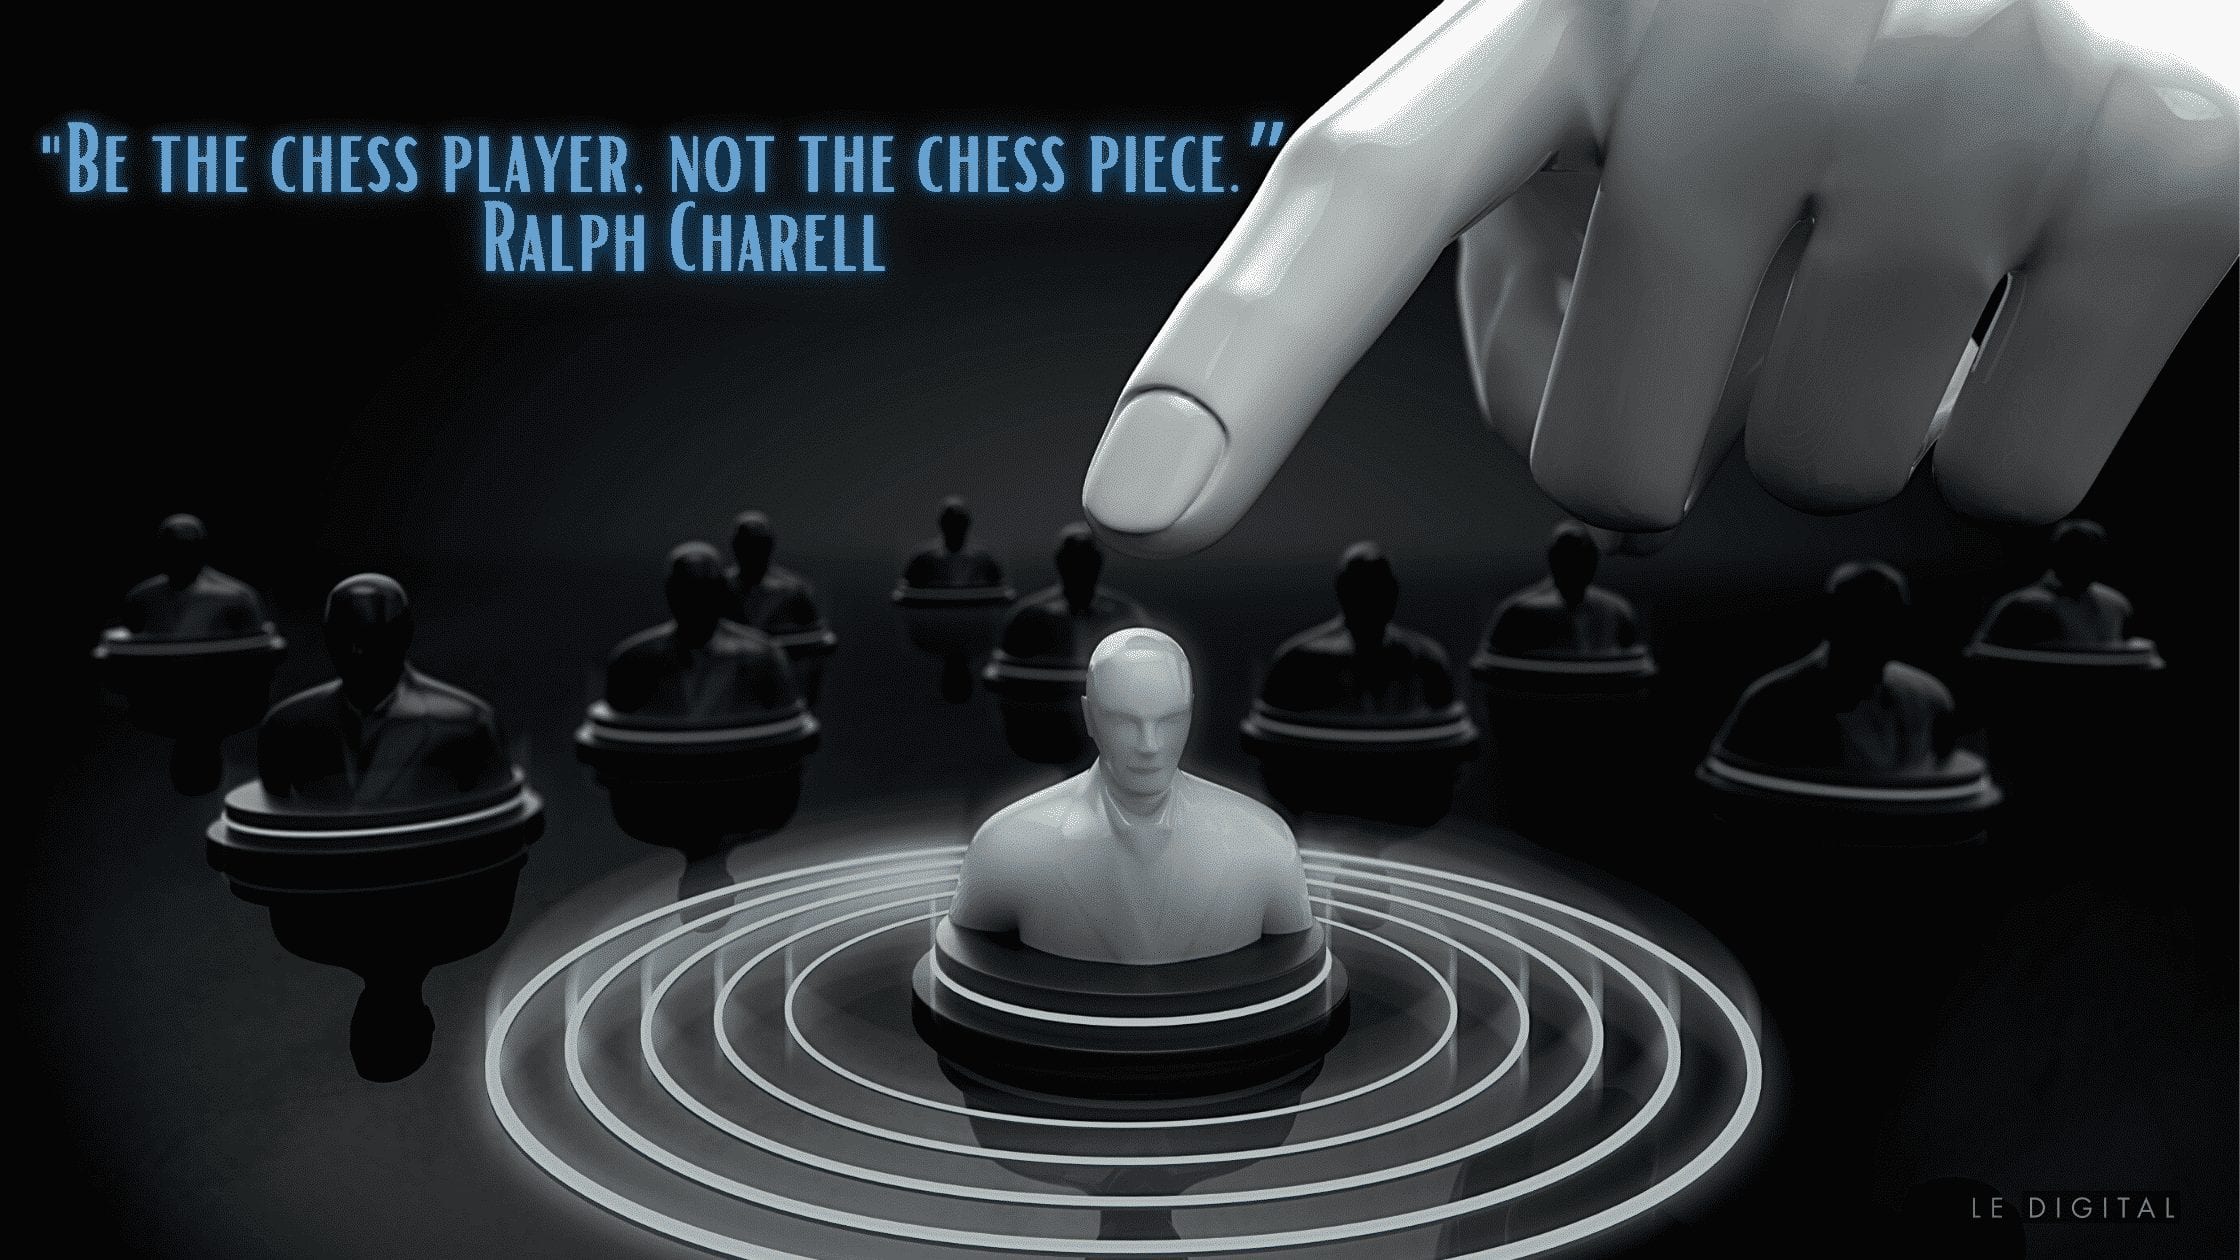 image with a white chess piece and black chess pieces